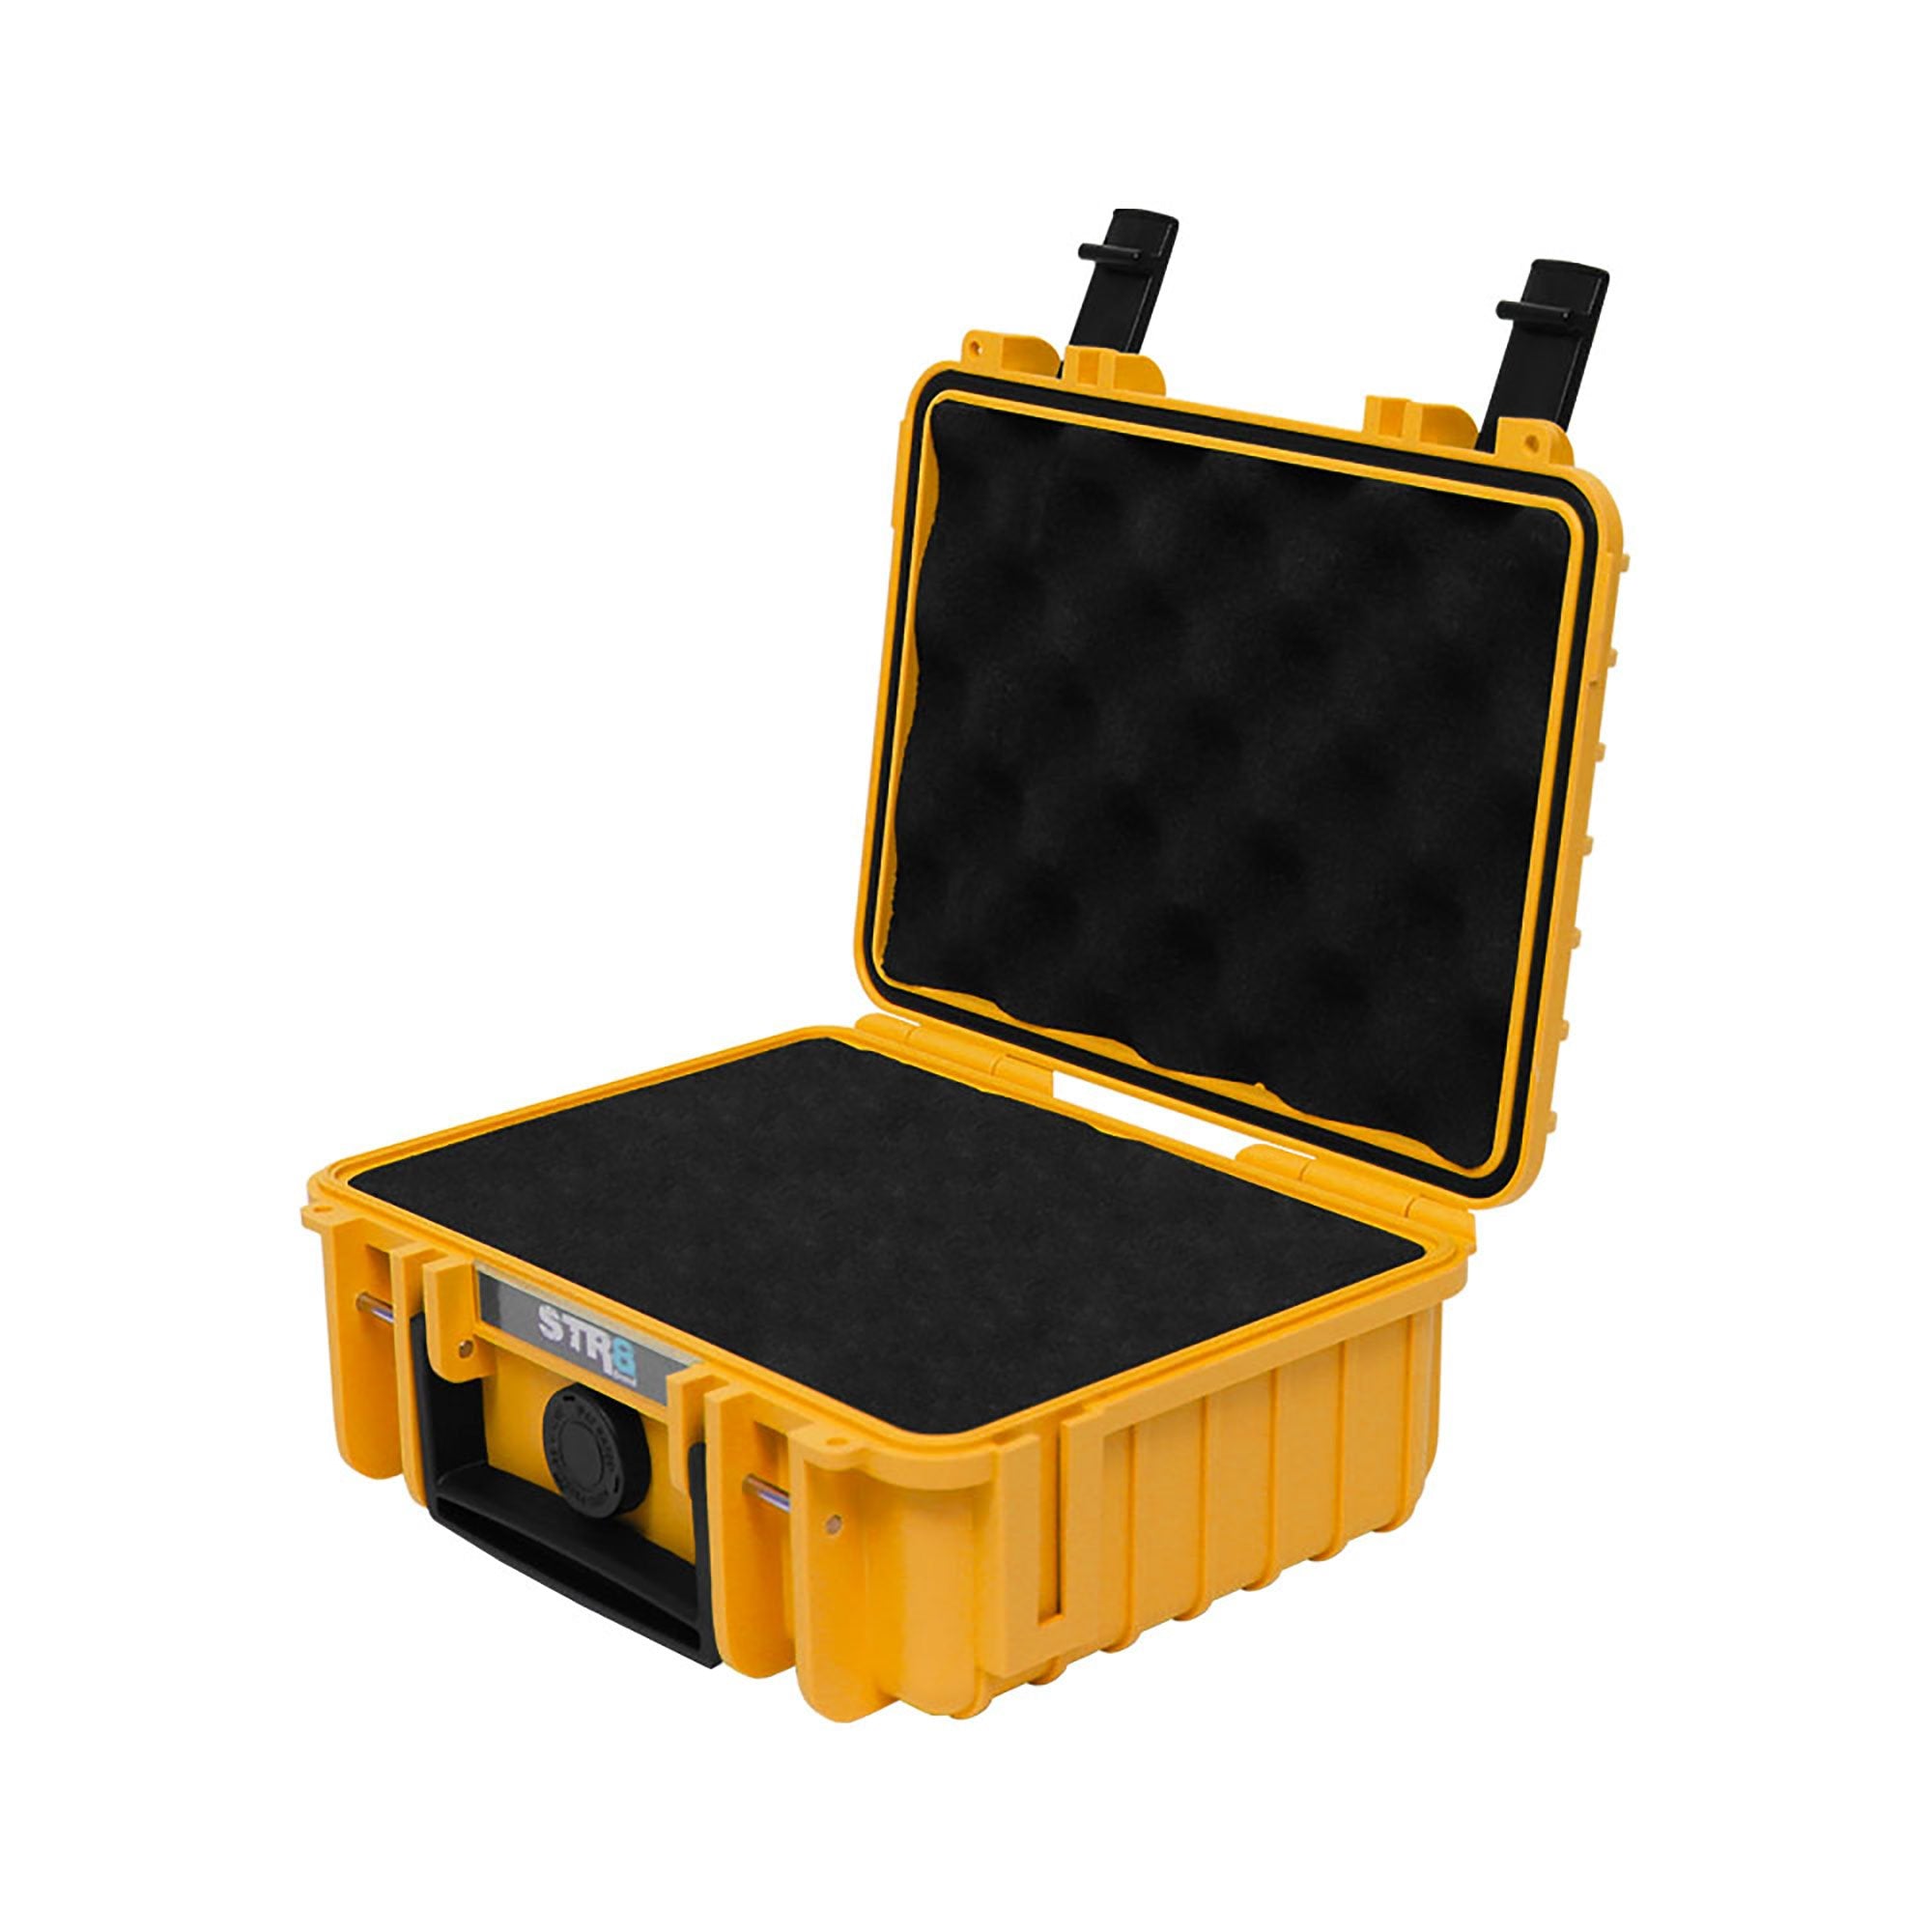 8" 2 Layer Canary Yellow STR8 Case - 2